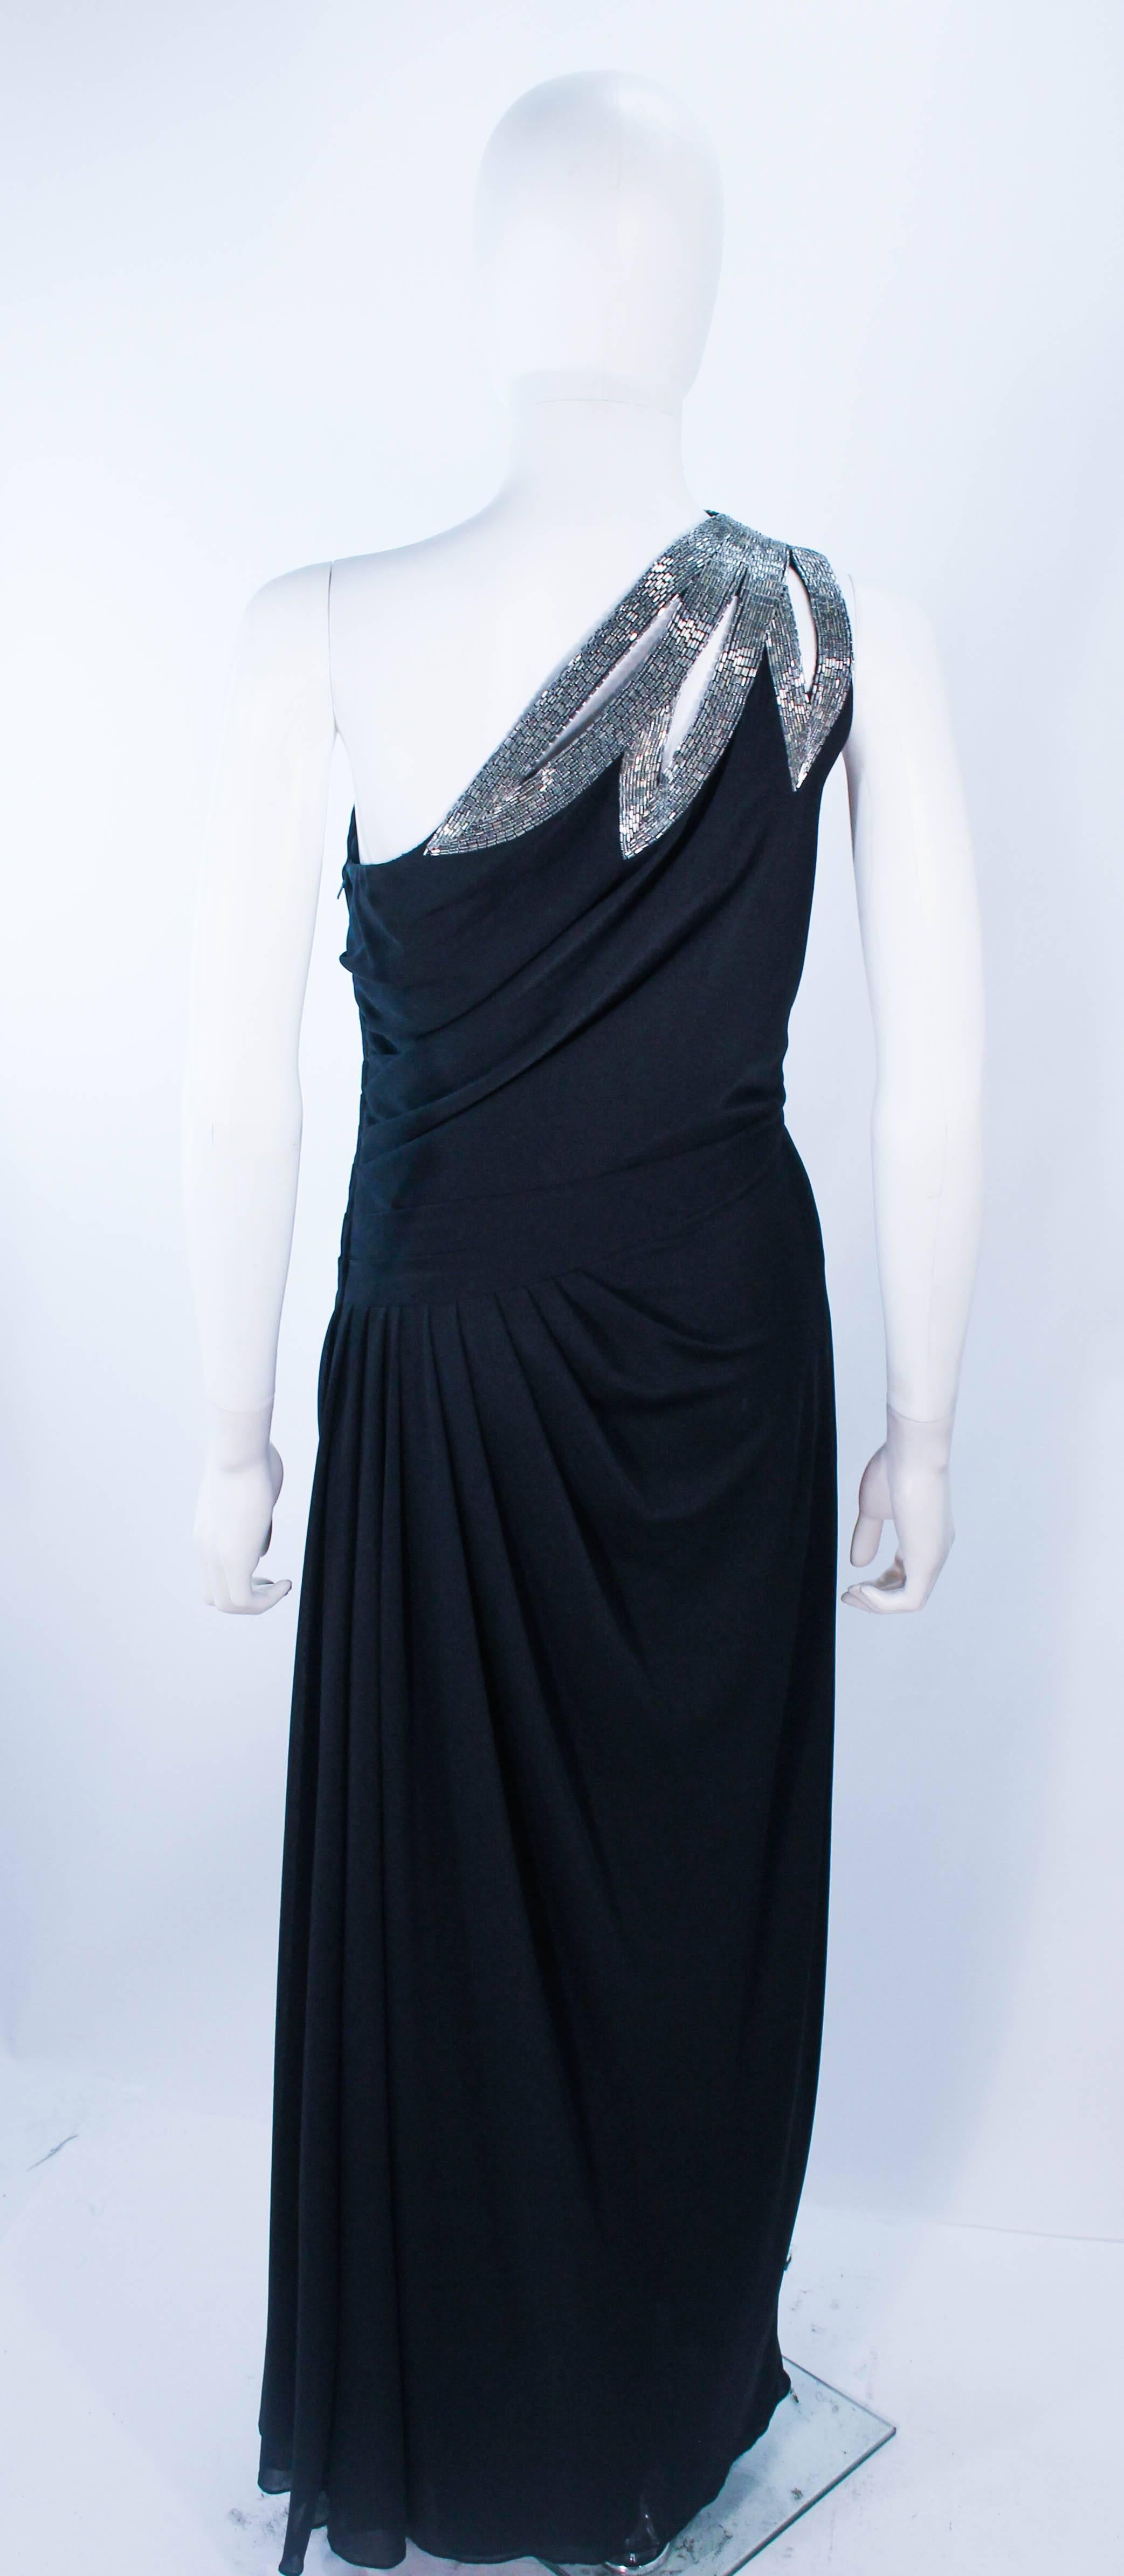 TRAVILLA 1970's Black Draped Jersey Gown with Silver Beaded Applique Size 8 10 5